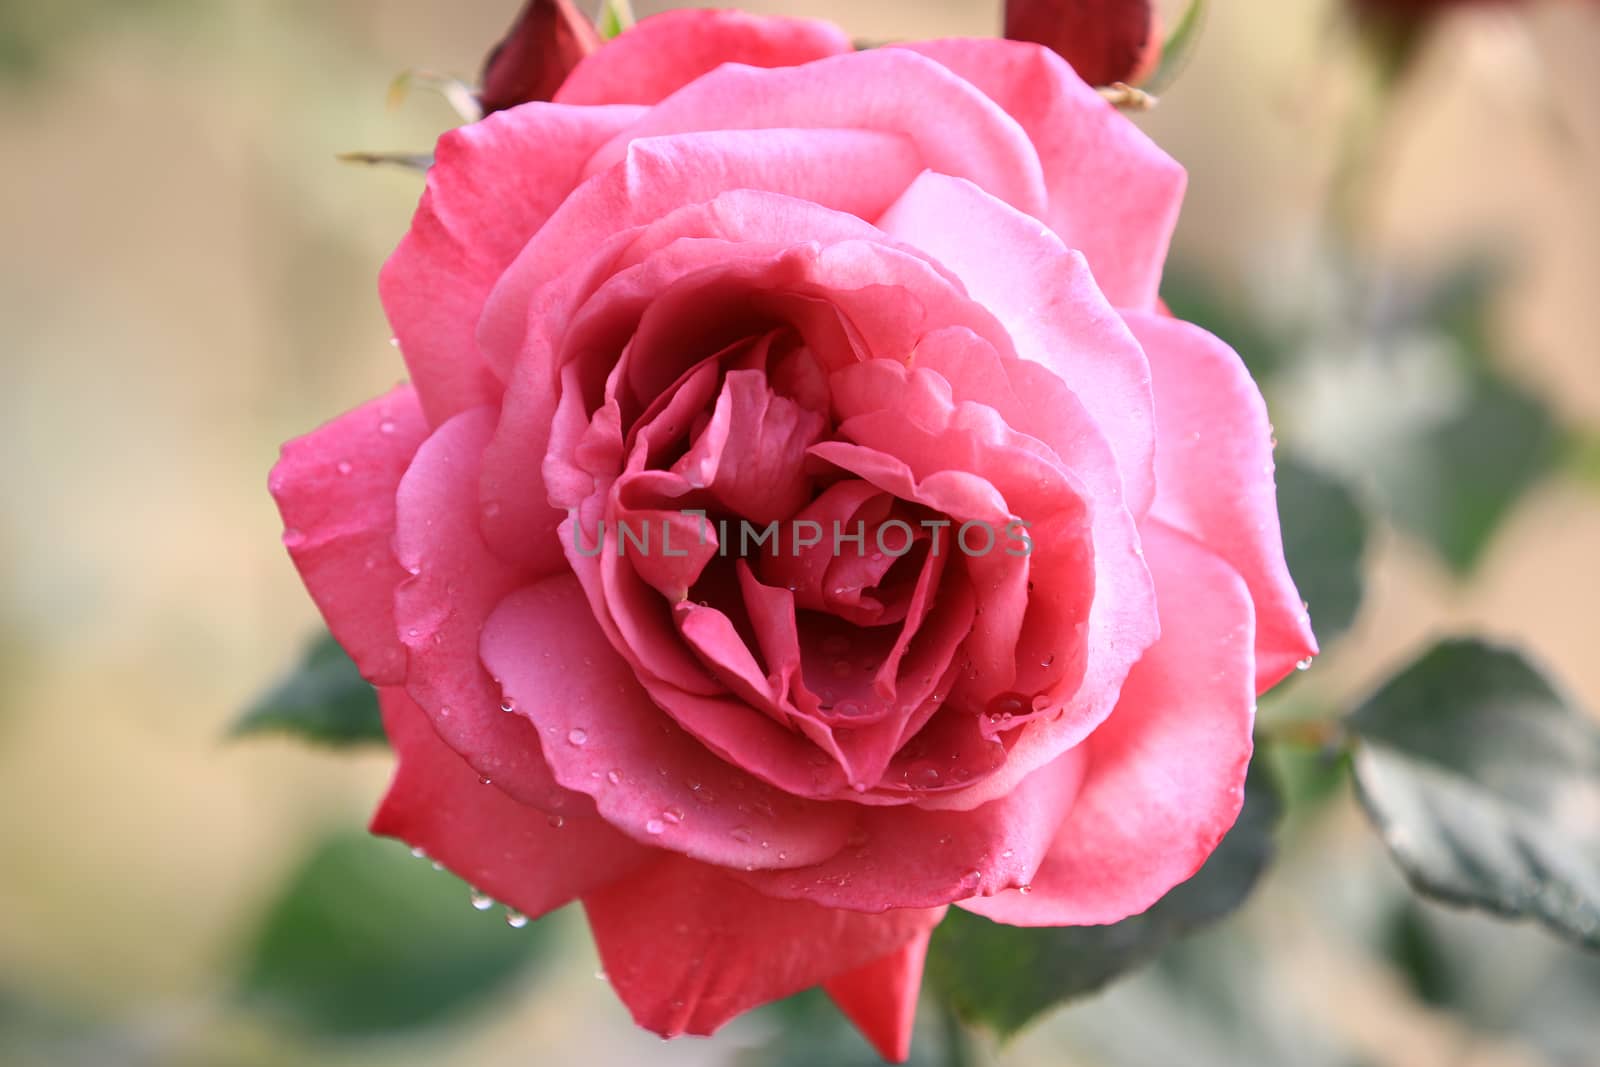 Pink rose flower on background blurry leaf in the garden of roses,Delicate beauty of close-up rose with soft sunlight